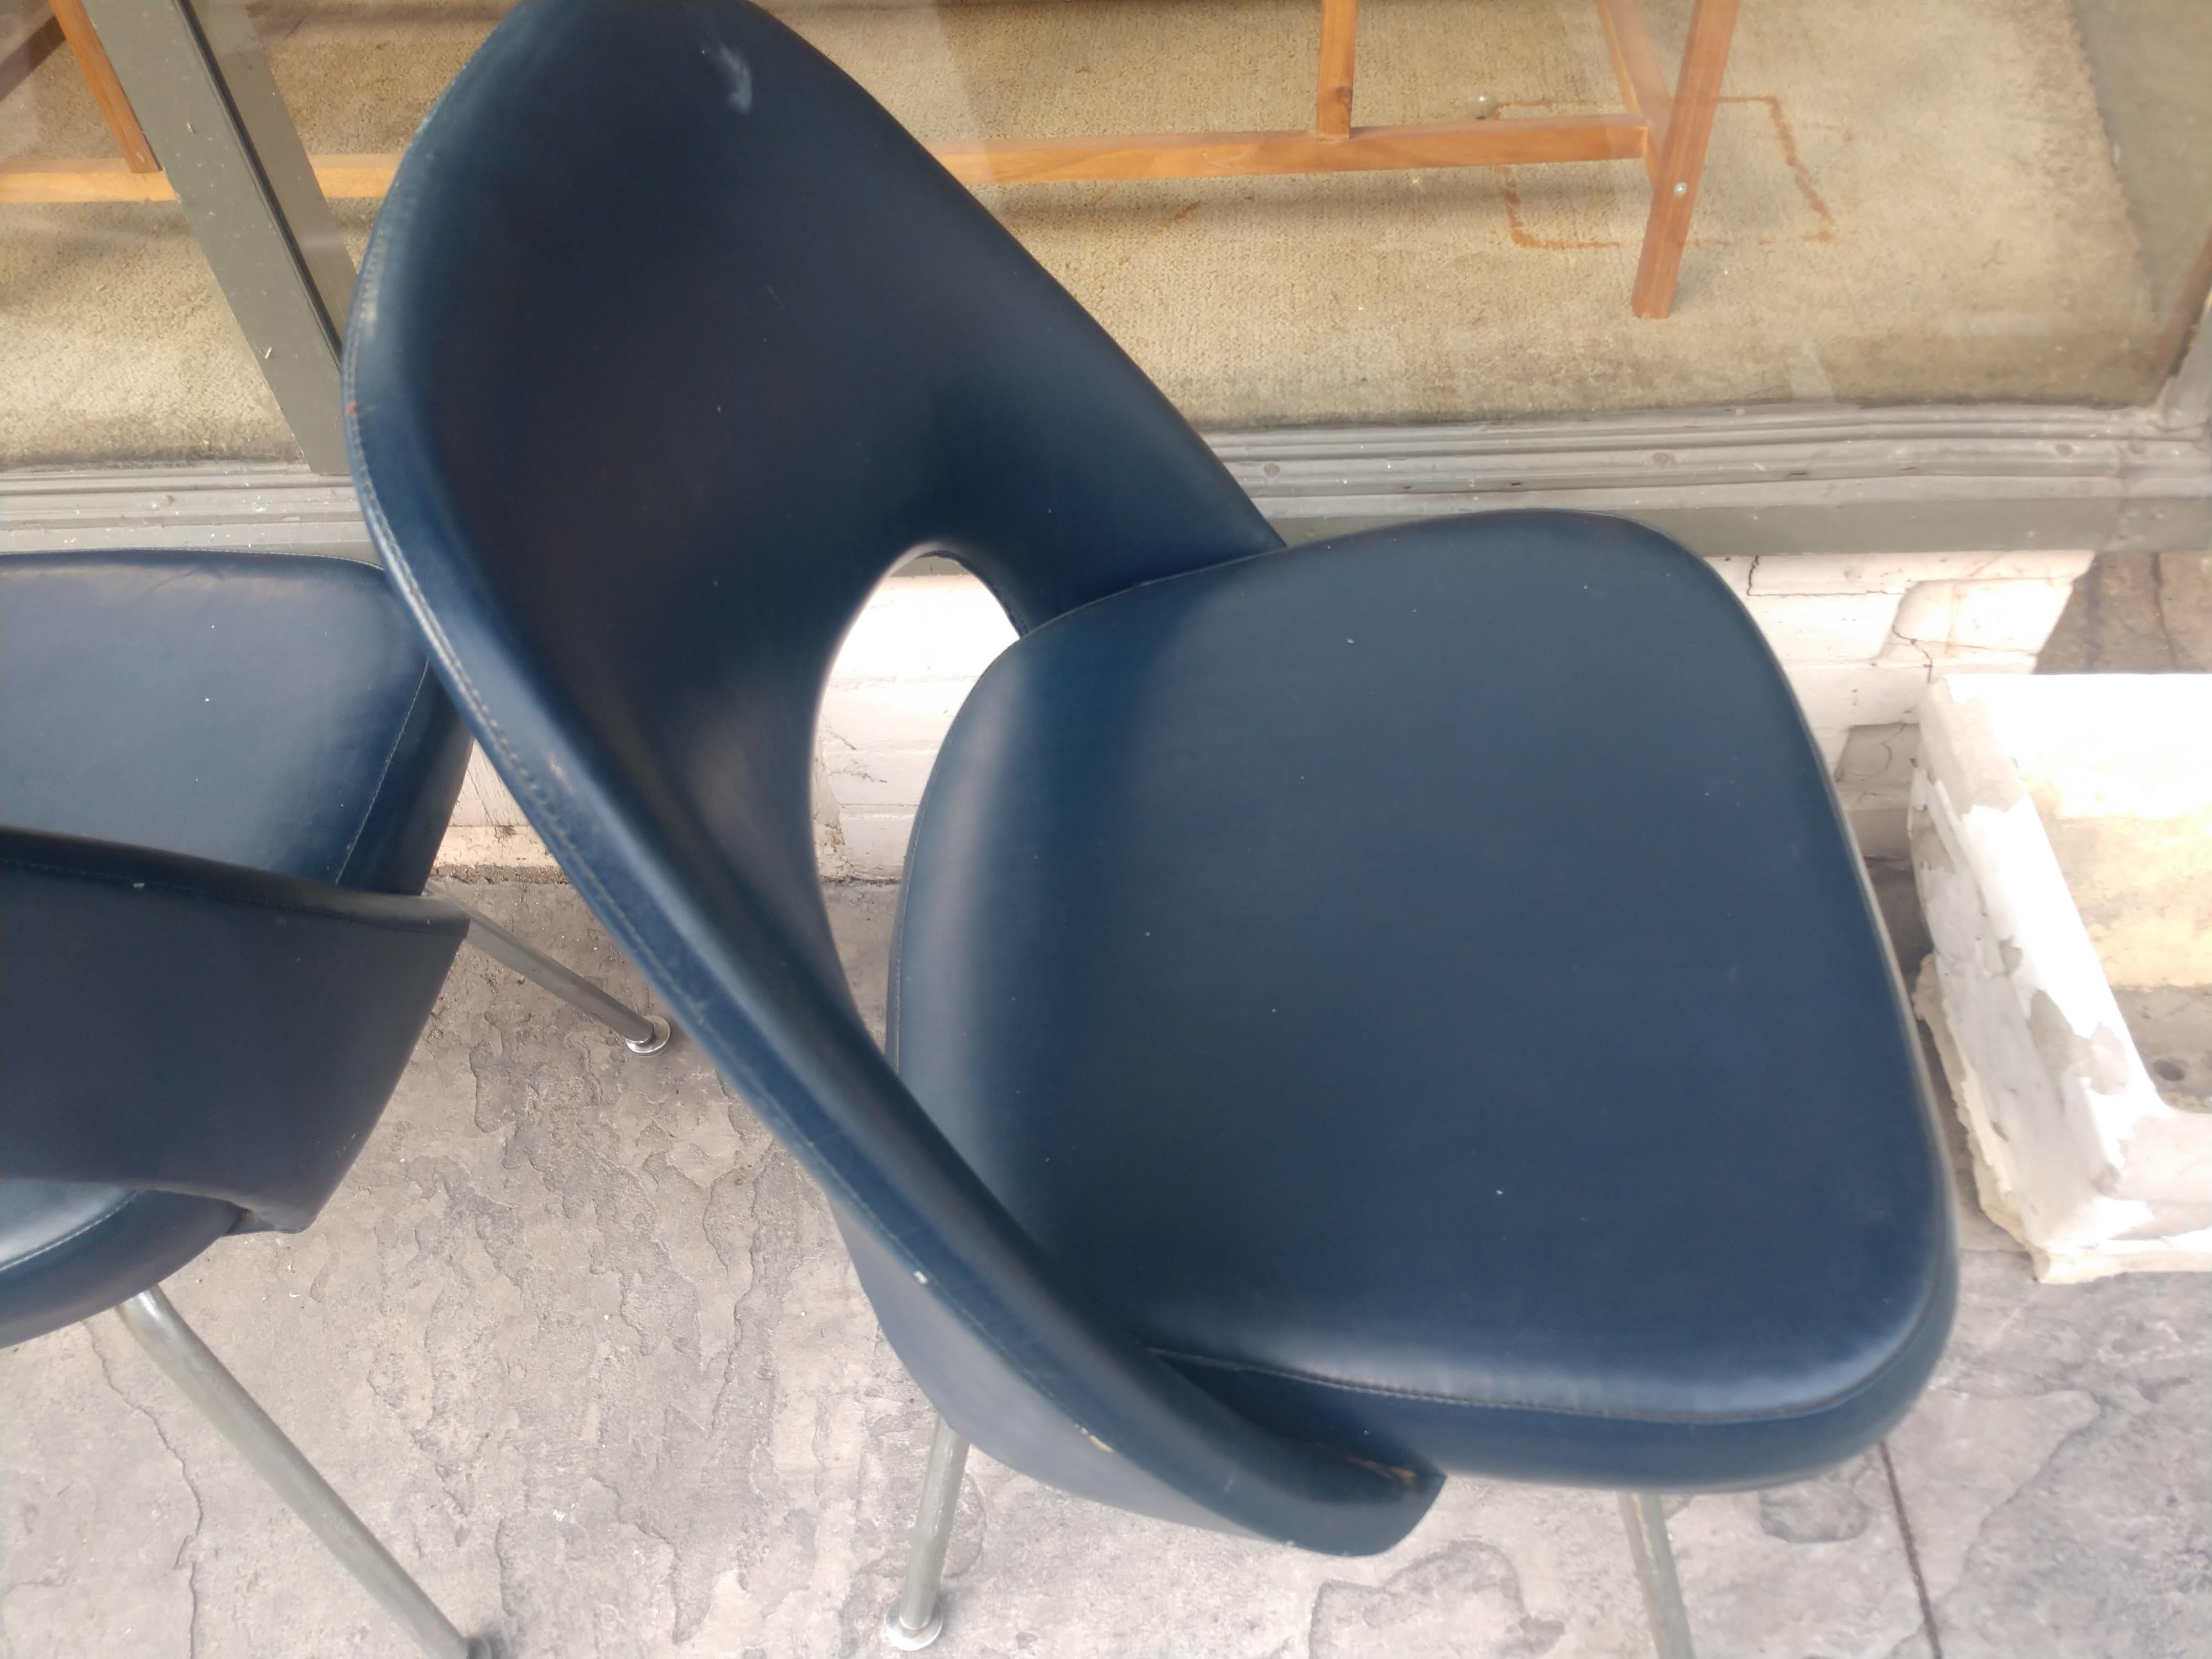 Pair of Saarinen executive side chairs by Knoll. Not signed but they came from the IBM building in East Fishkill NY. Sold and priced as a pair. Vinyl fabric could use an update. Seat hgt is 18.25. Can be parcel posted.